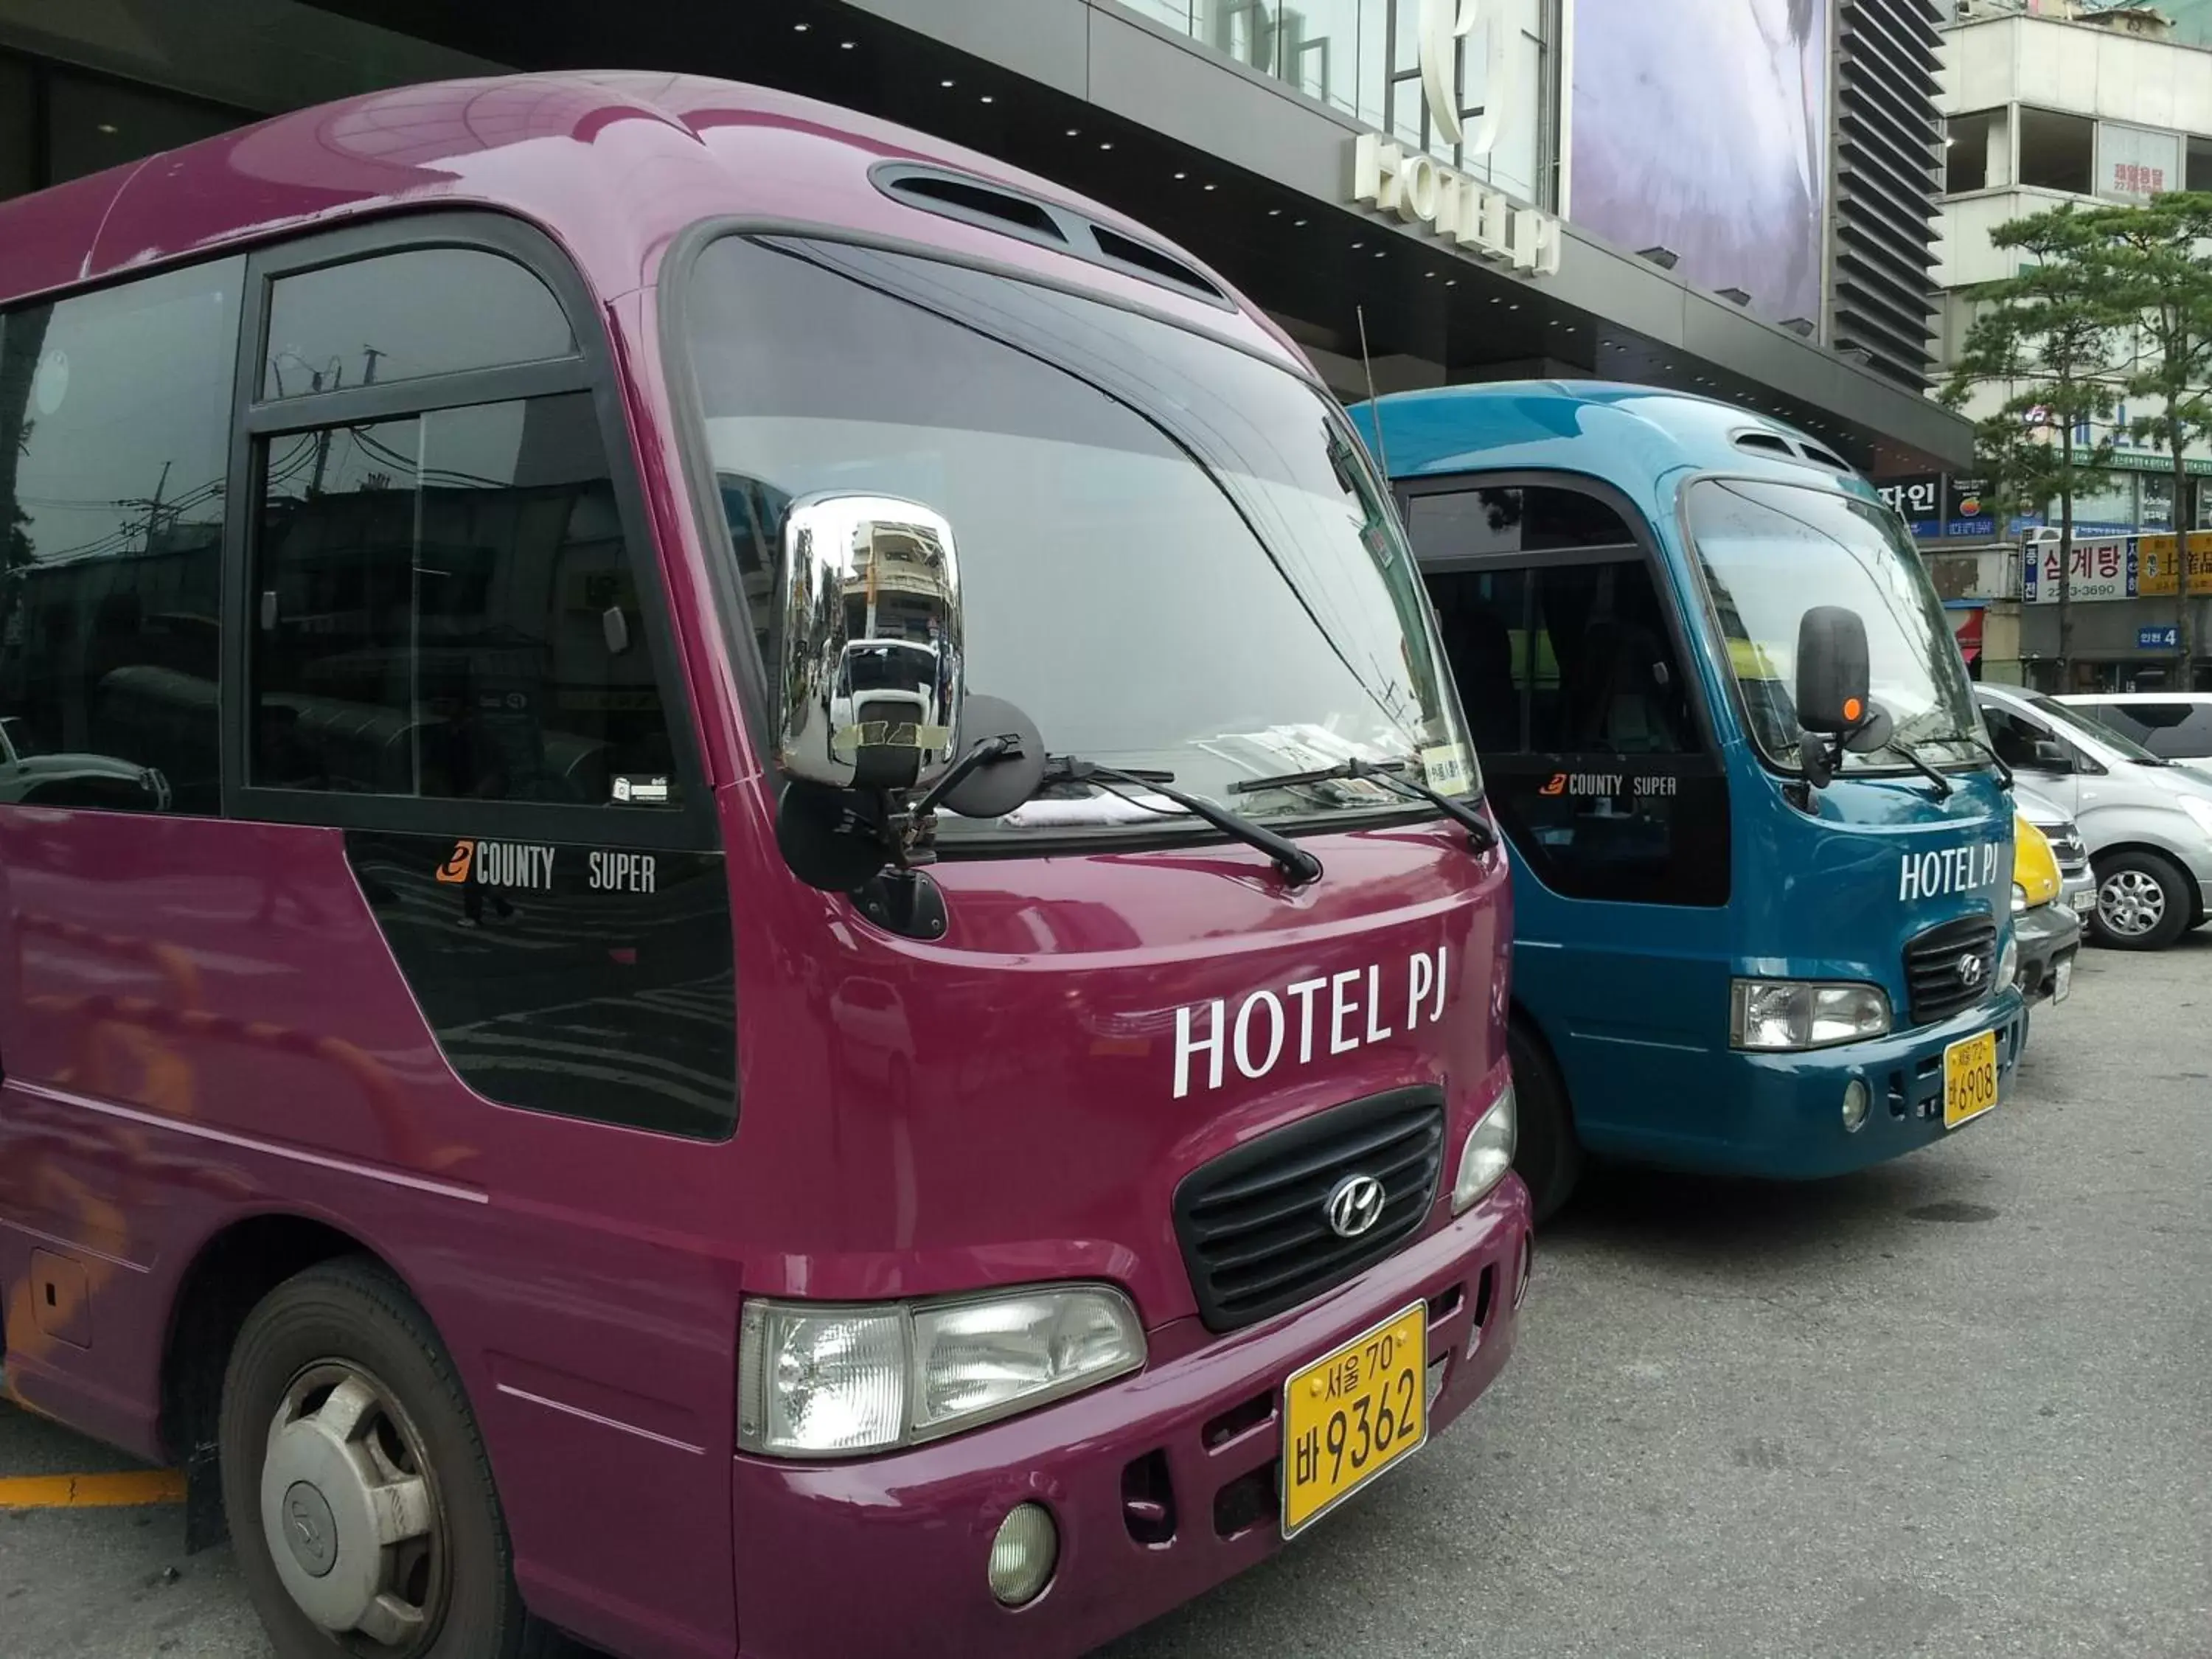 Area and facilities, Guests in Hotel PJ Myeongdong